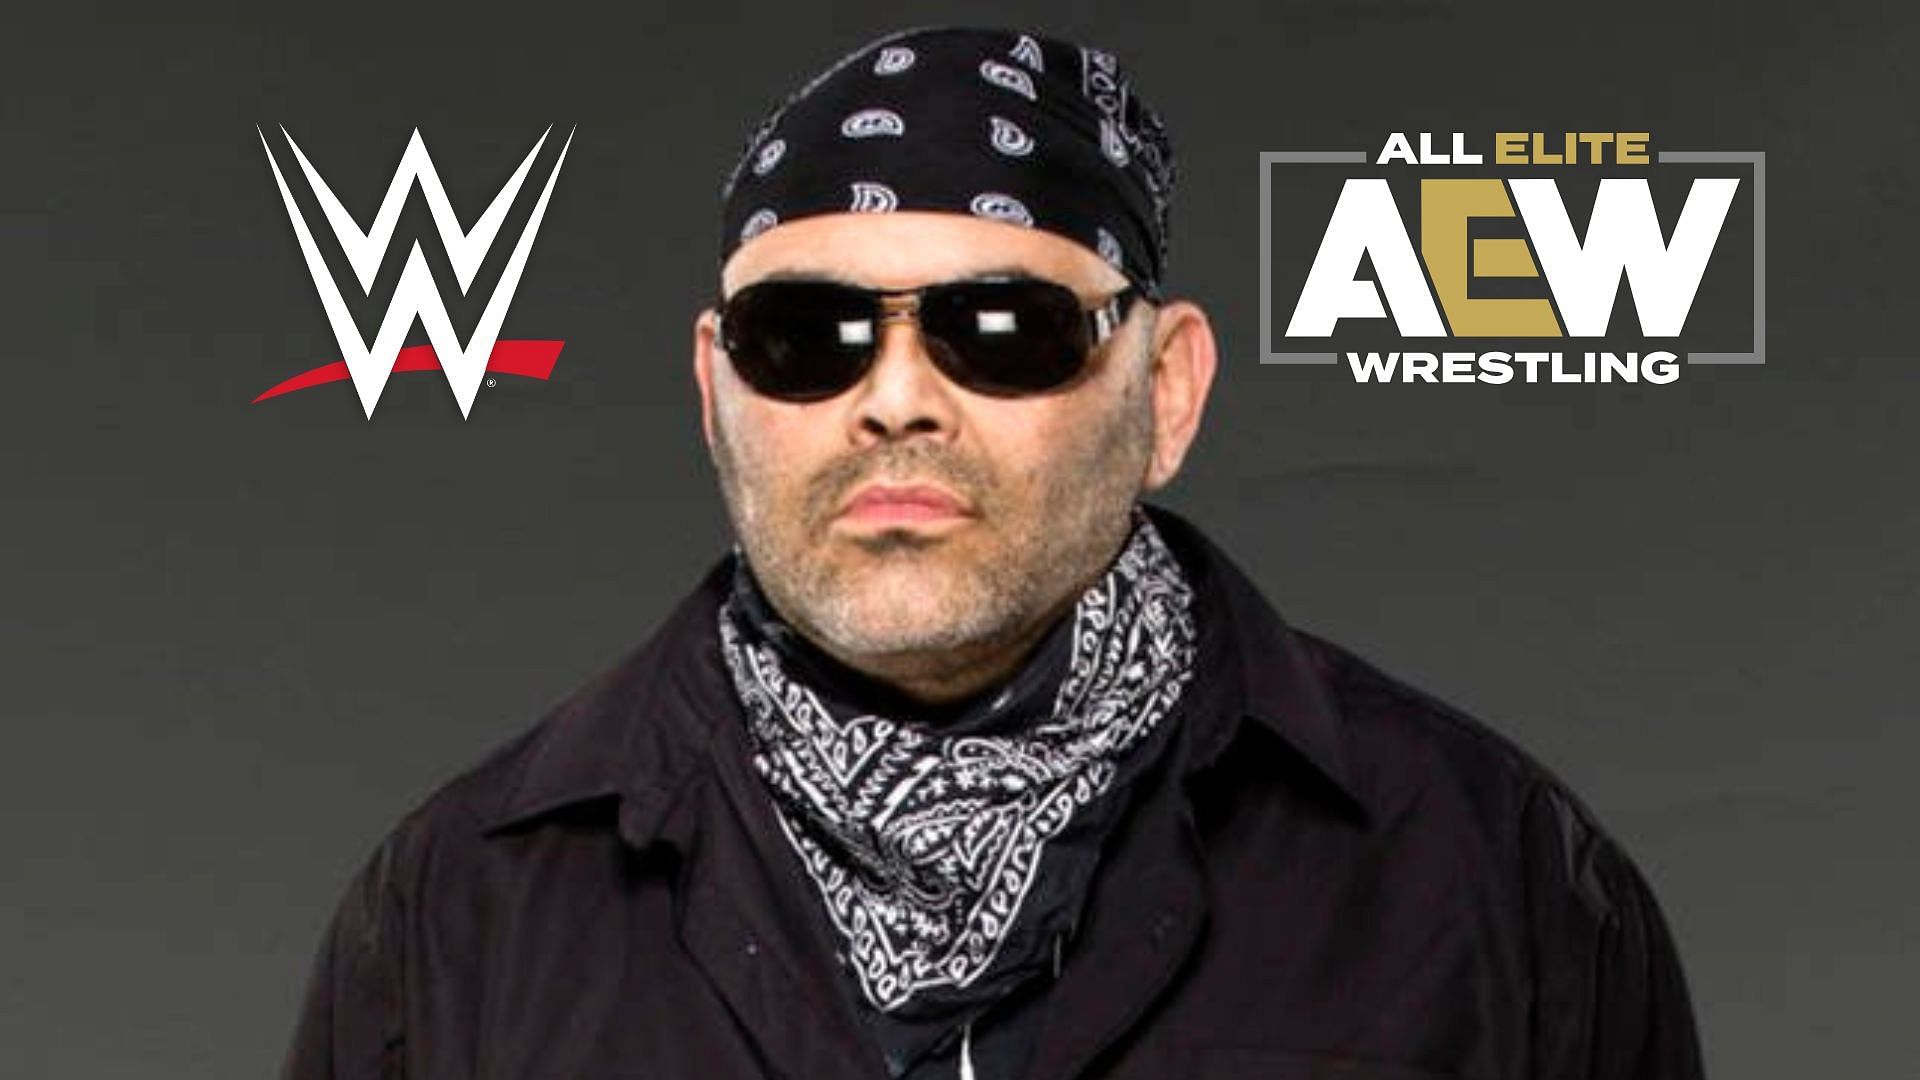 Konnan thinks AEW and WWE should work together